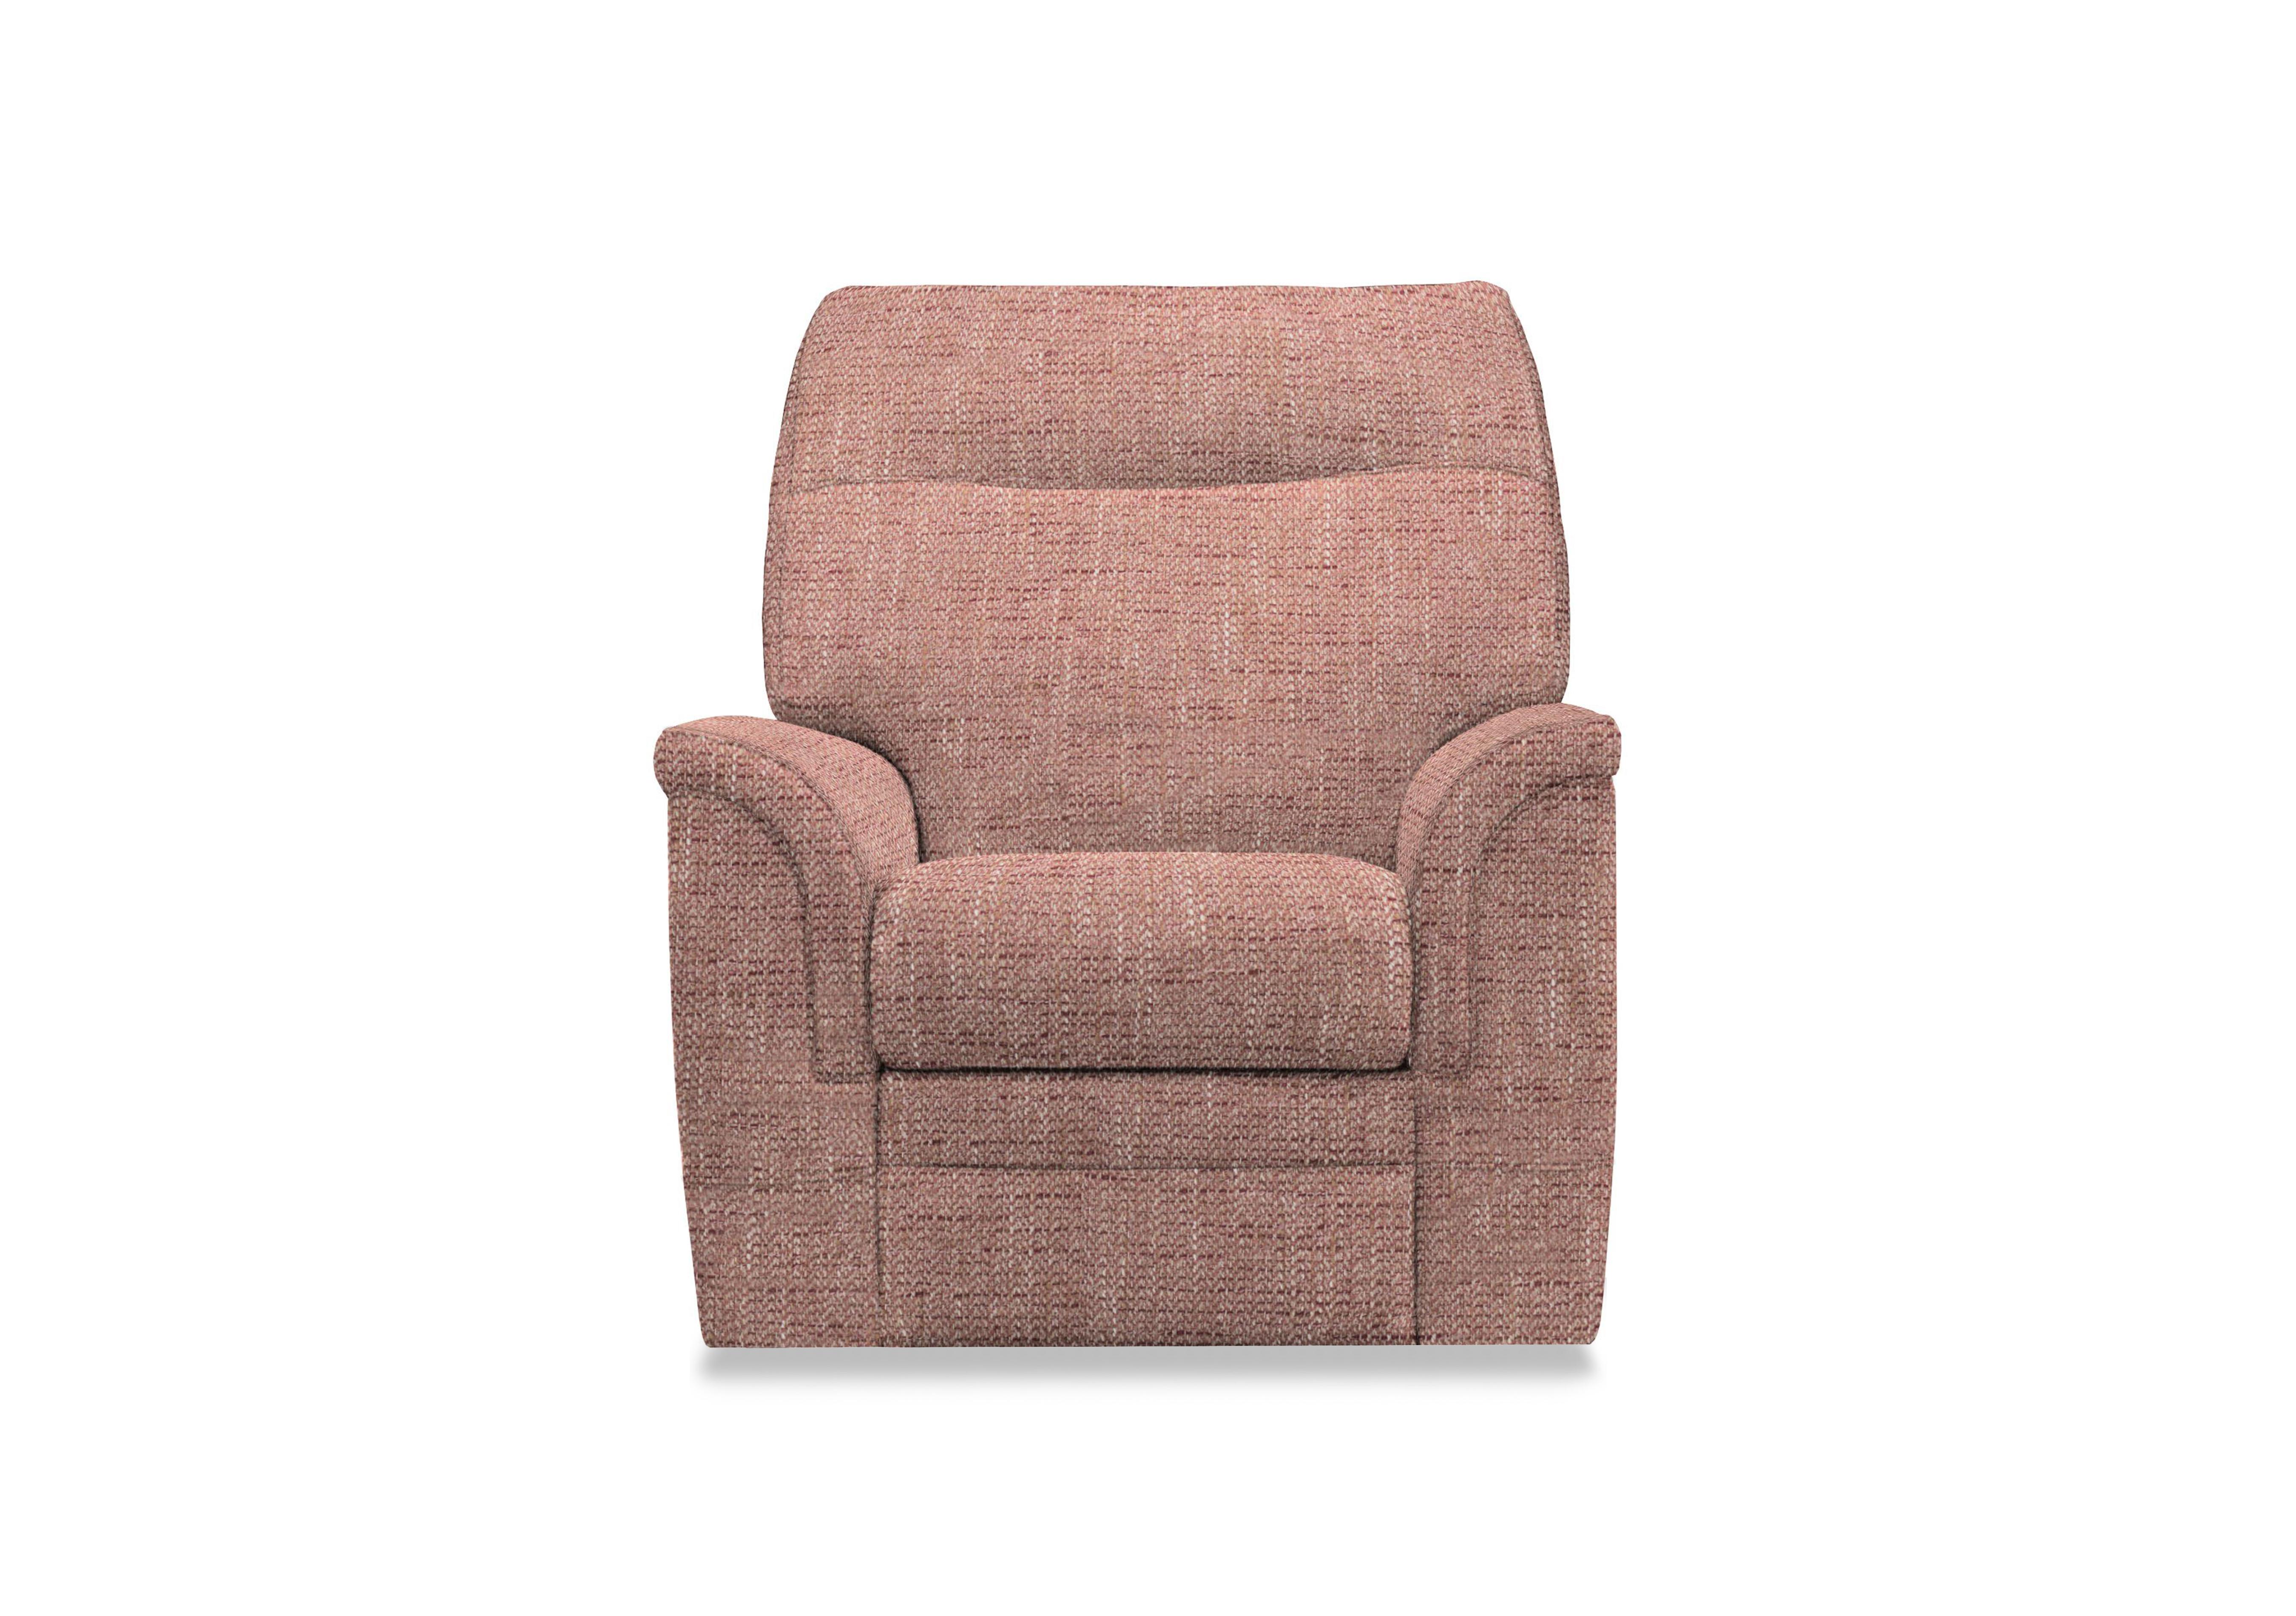 Hudson 23 Fabric Chair in Country Rose 001409-0003 on Furniture Village